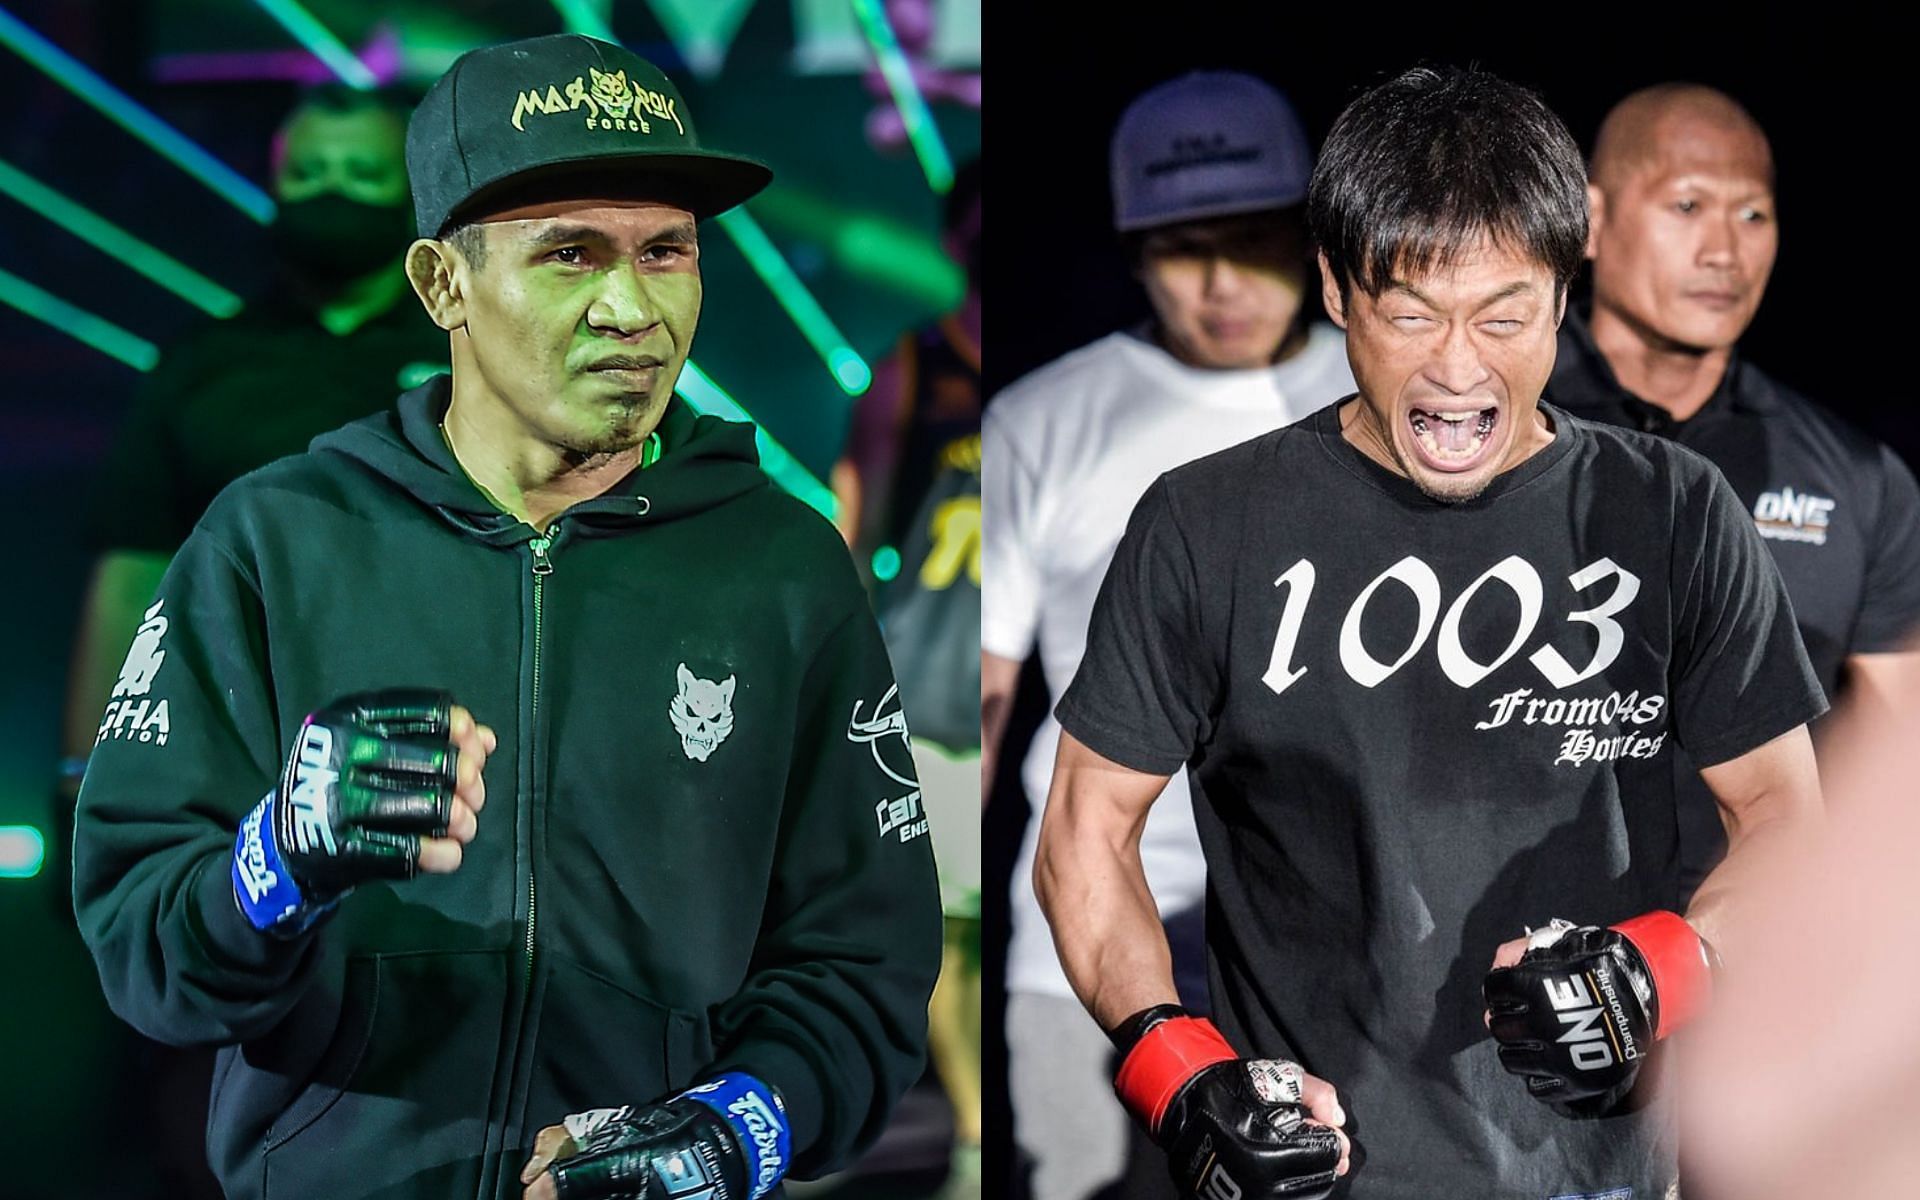 Jeremy Miado is pumped up to fight Senzo Ikeda to kick off 2022 | Photo: ONE Championship